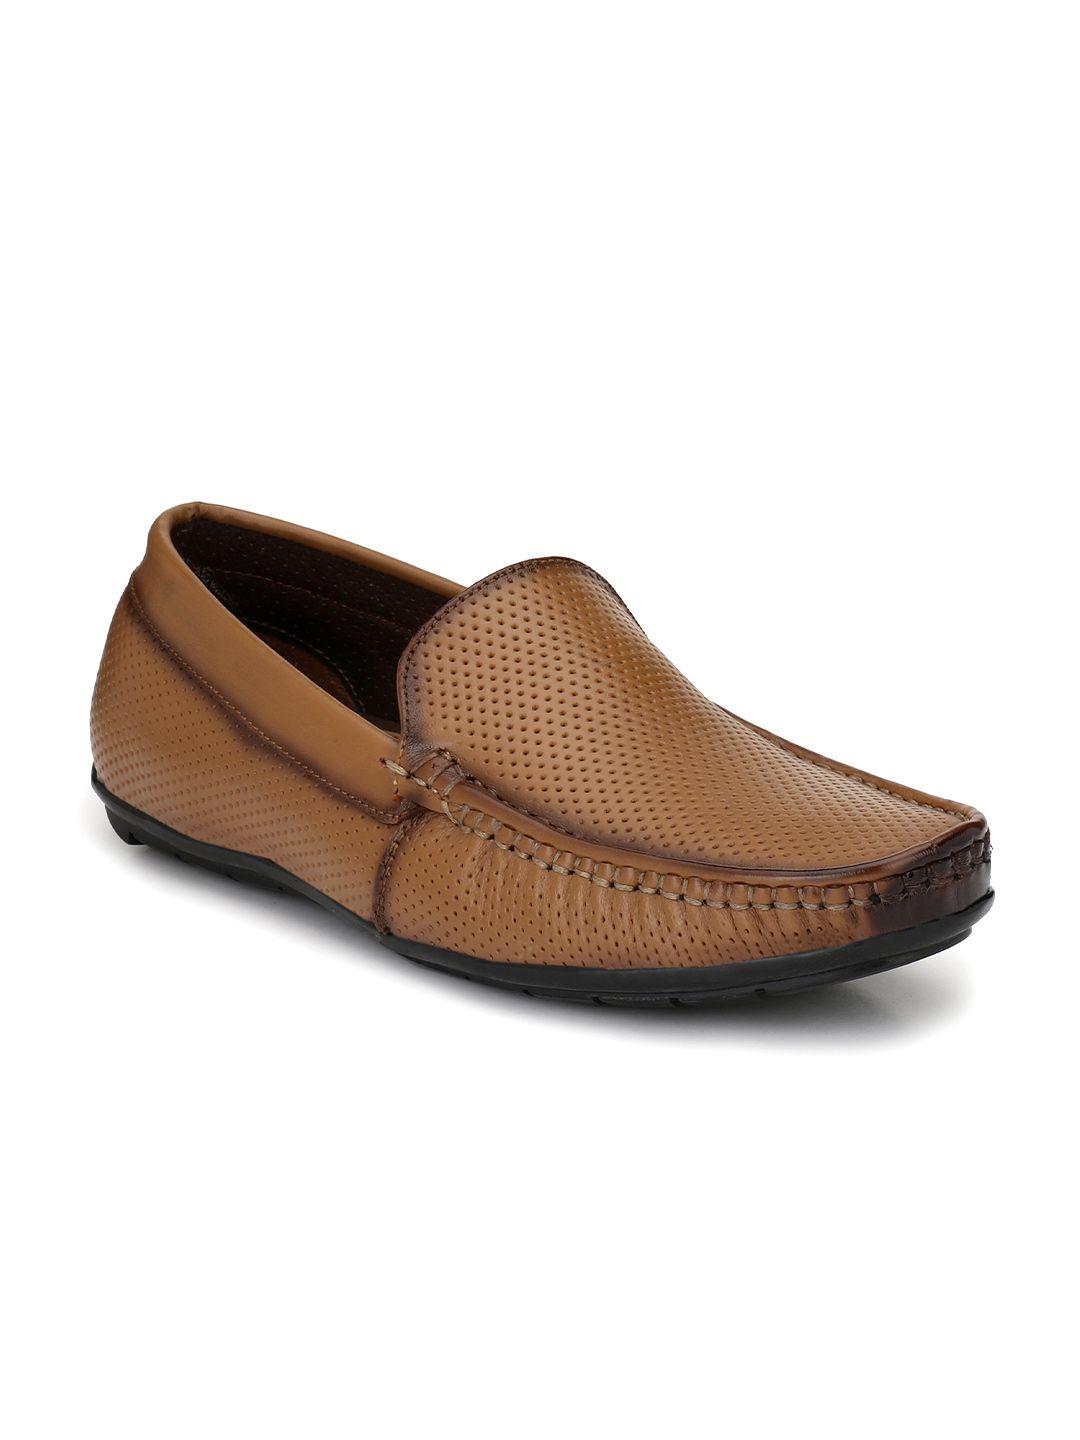 hirels men perforations leather loafers